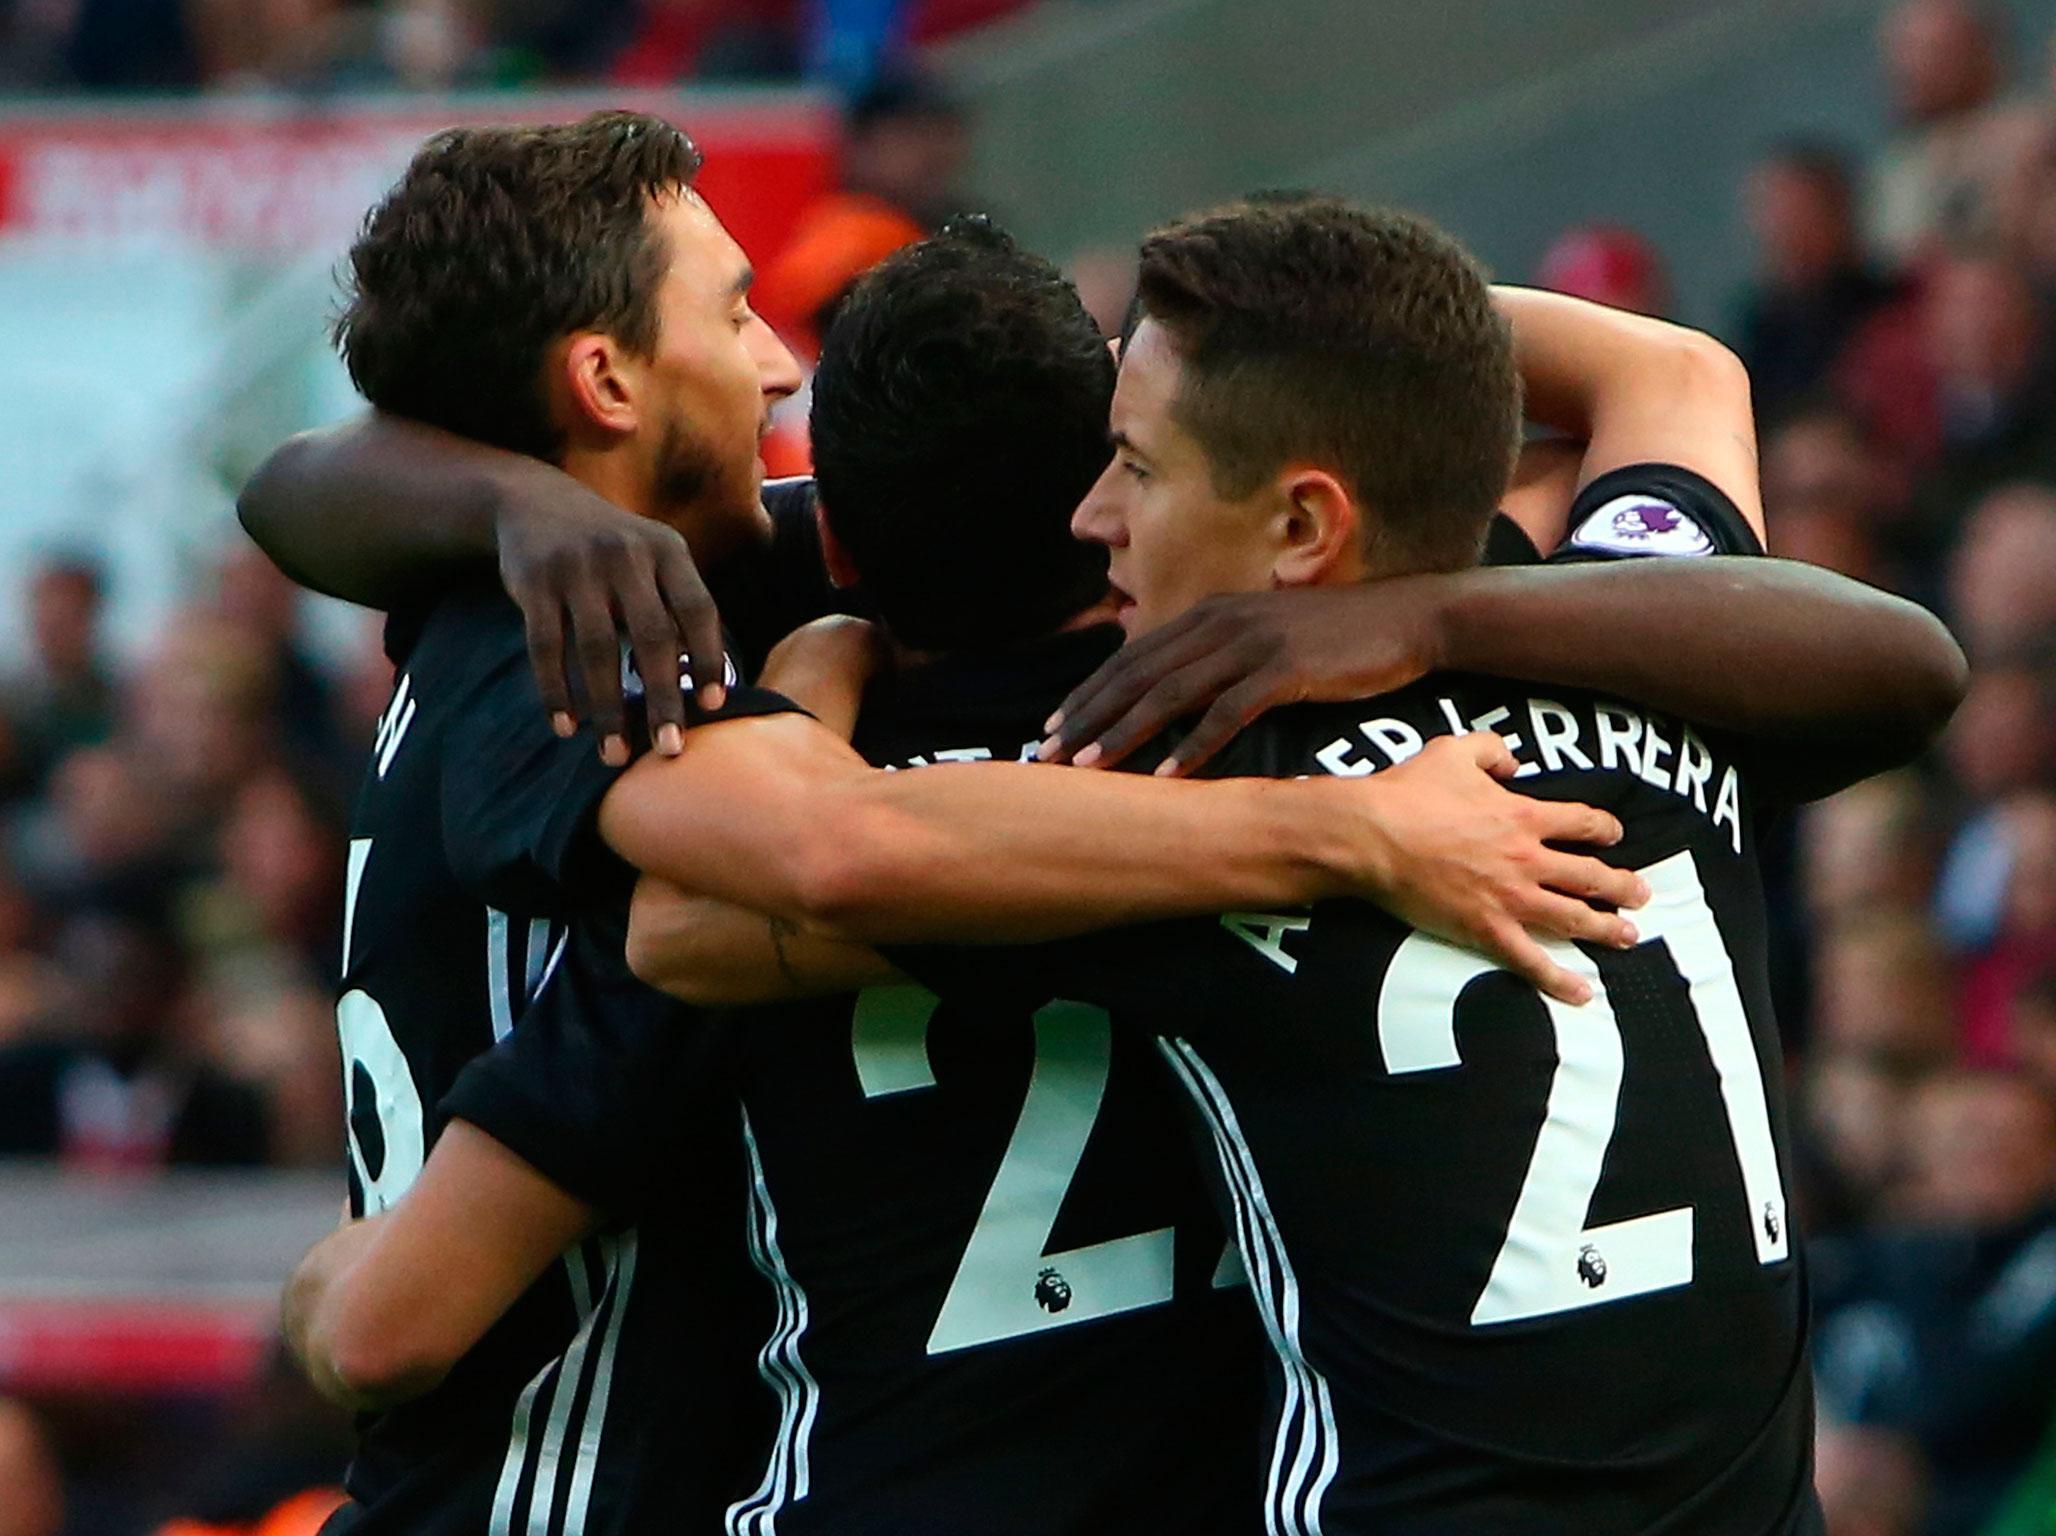 Ander Herrera made his first start of the season as Manchester United's perfect start was dented at Stoke